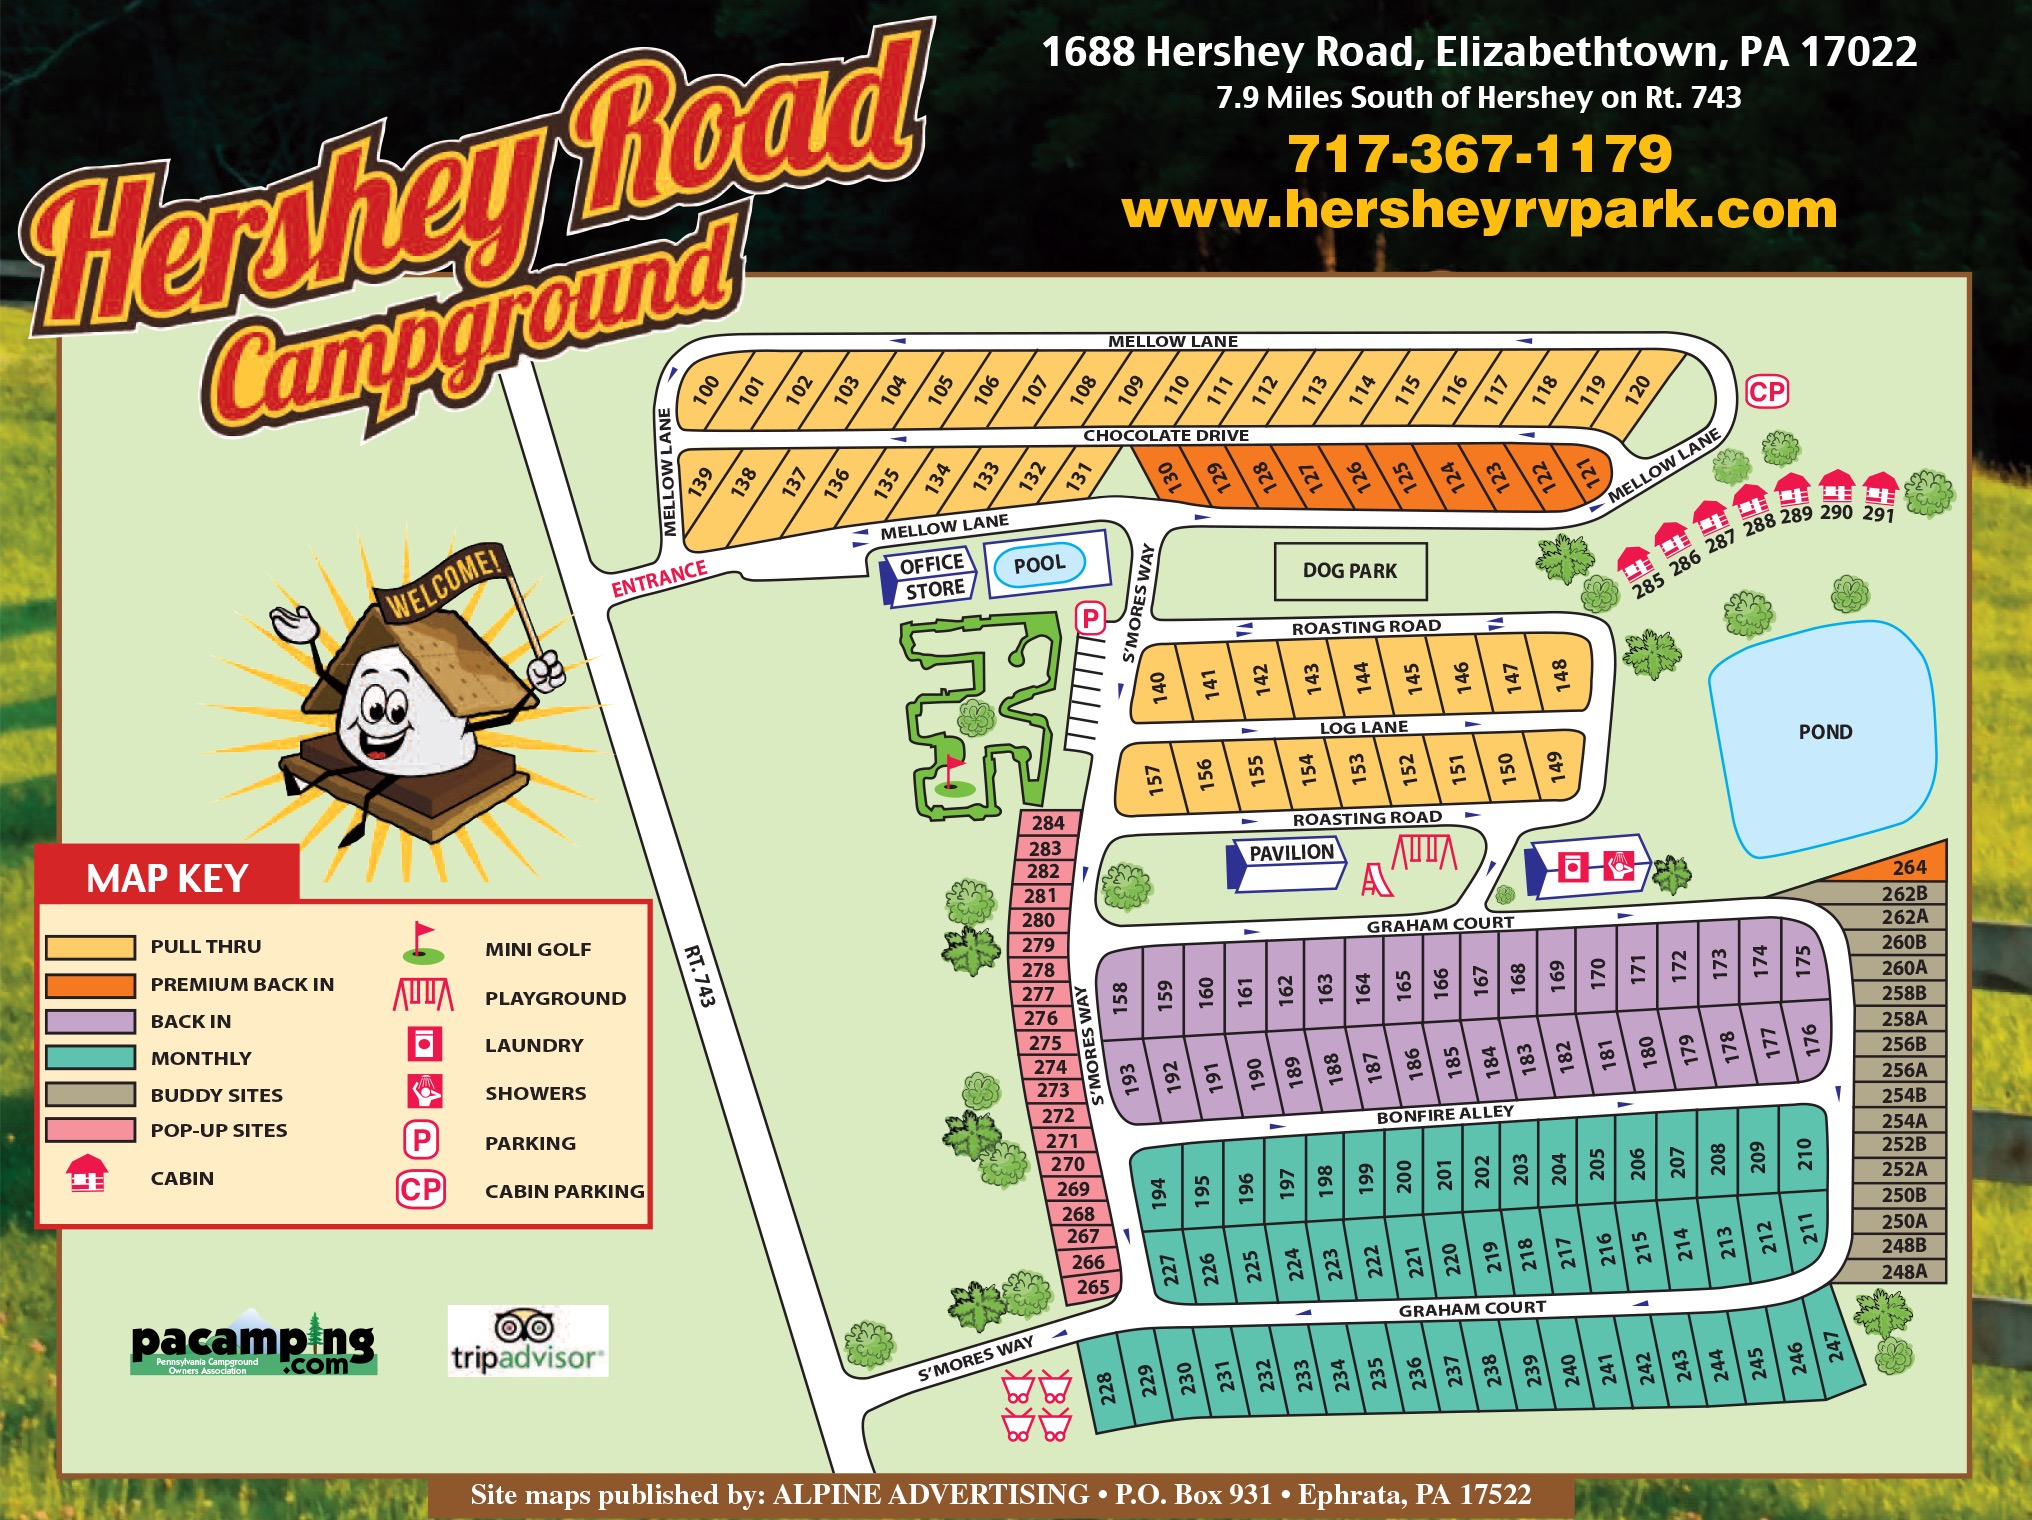 Hershey Road Campground Map